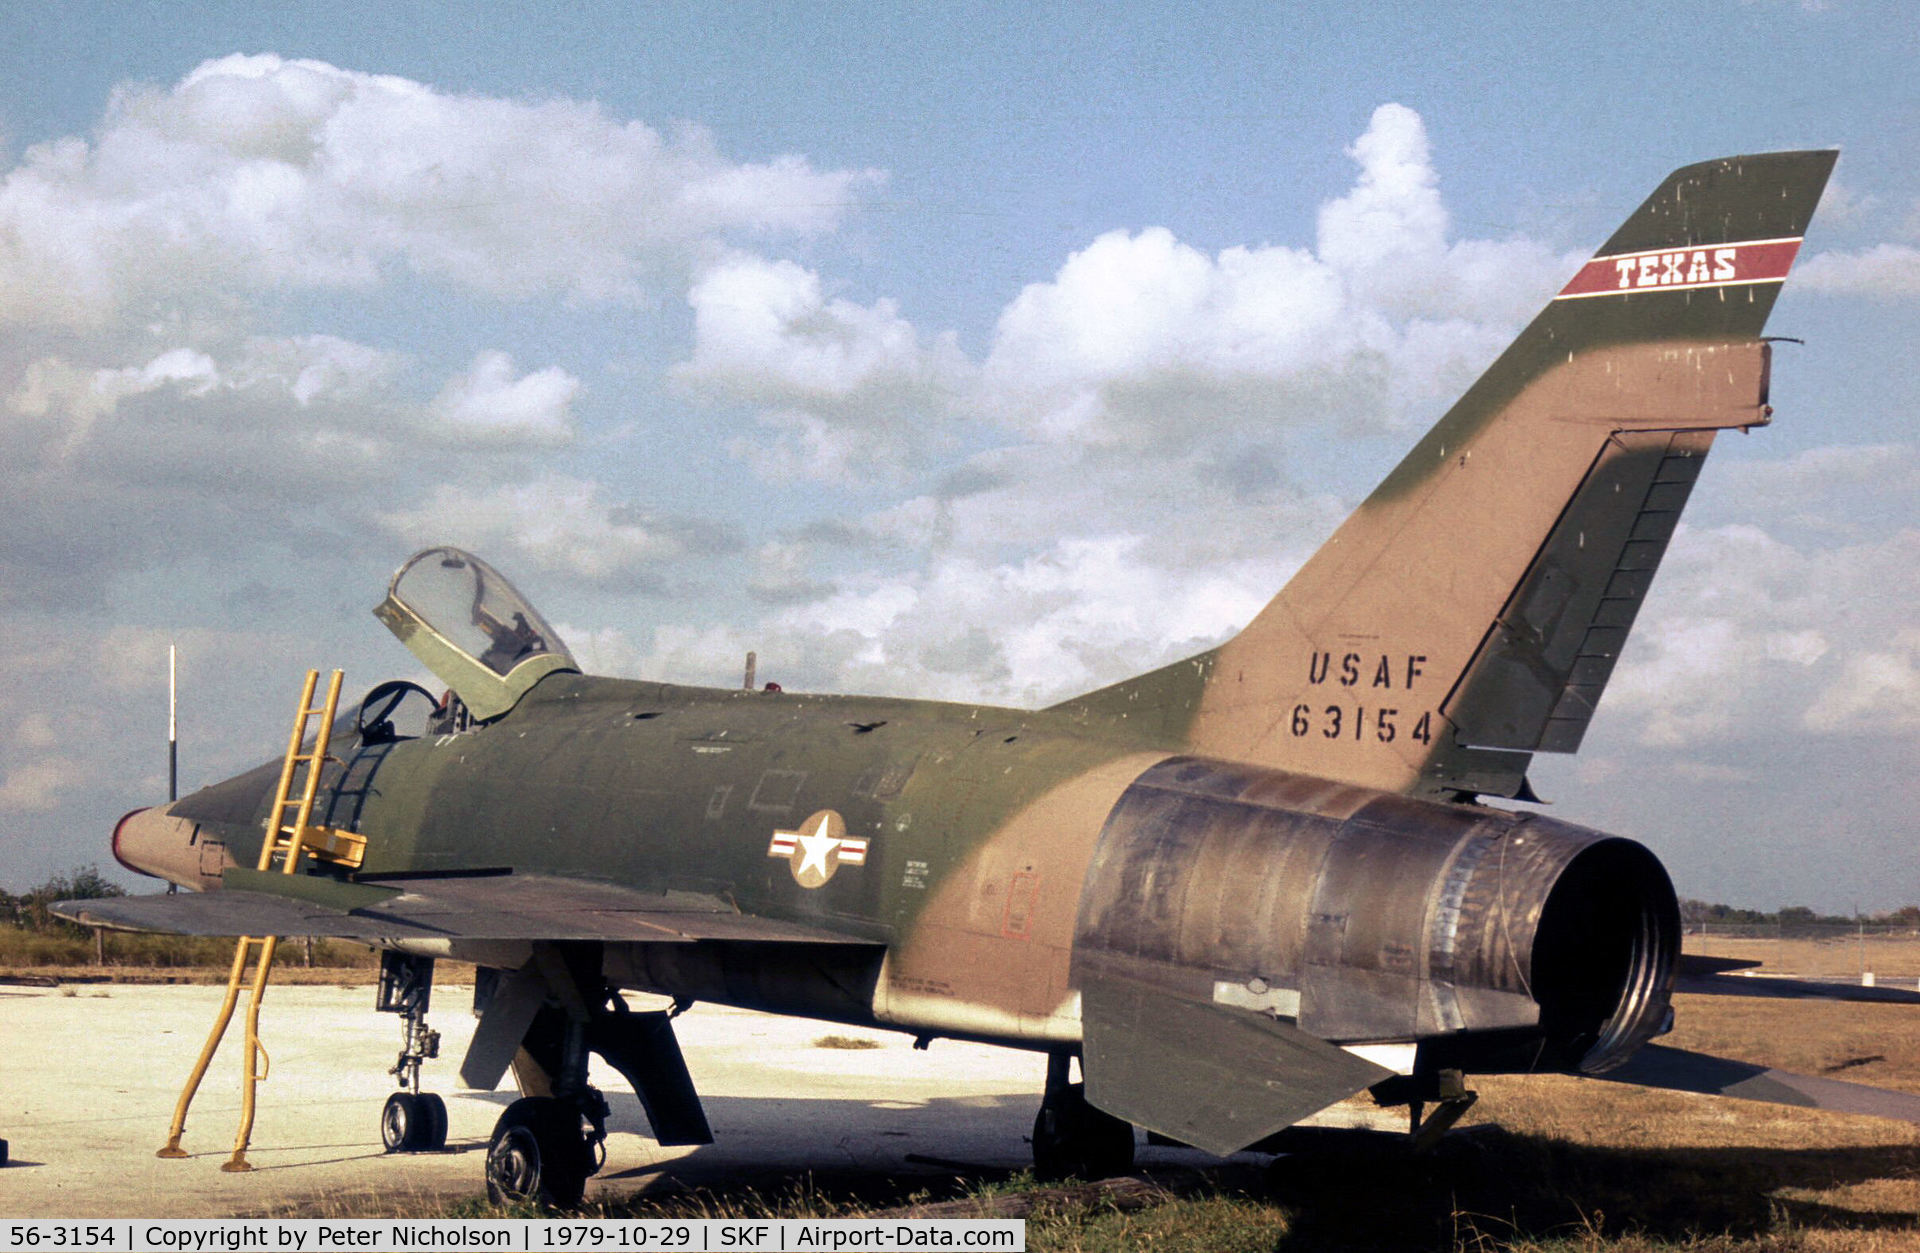 56-3154, 1956 North American F-100D Super Sabre C/N 235-350, F-100D Super Sabre of 182nd Tactical Fighter Squadron/149th Tactical Fighter Group at Kelly AFB in October 1979